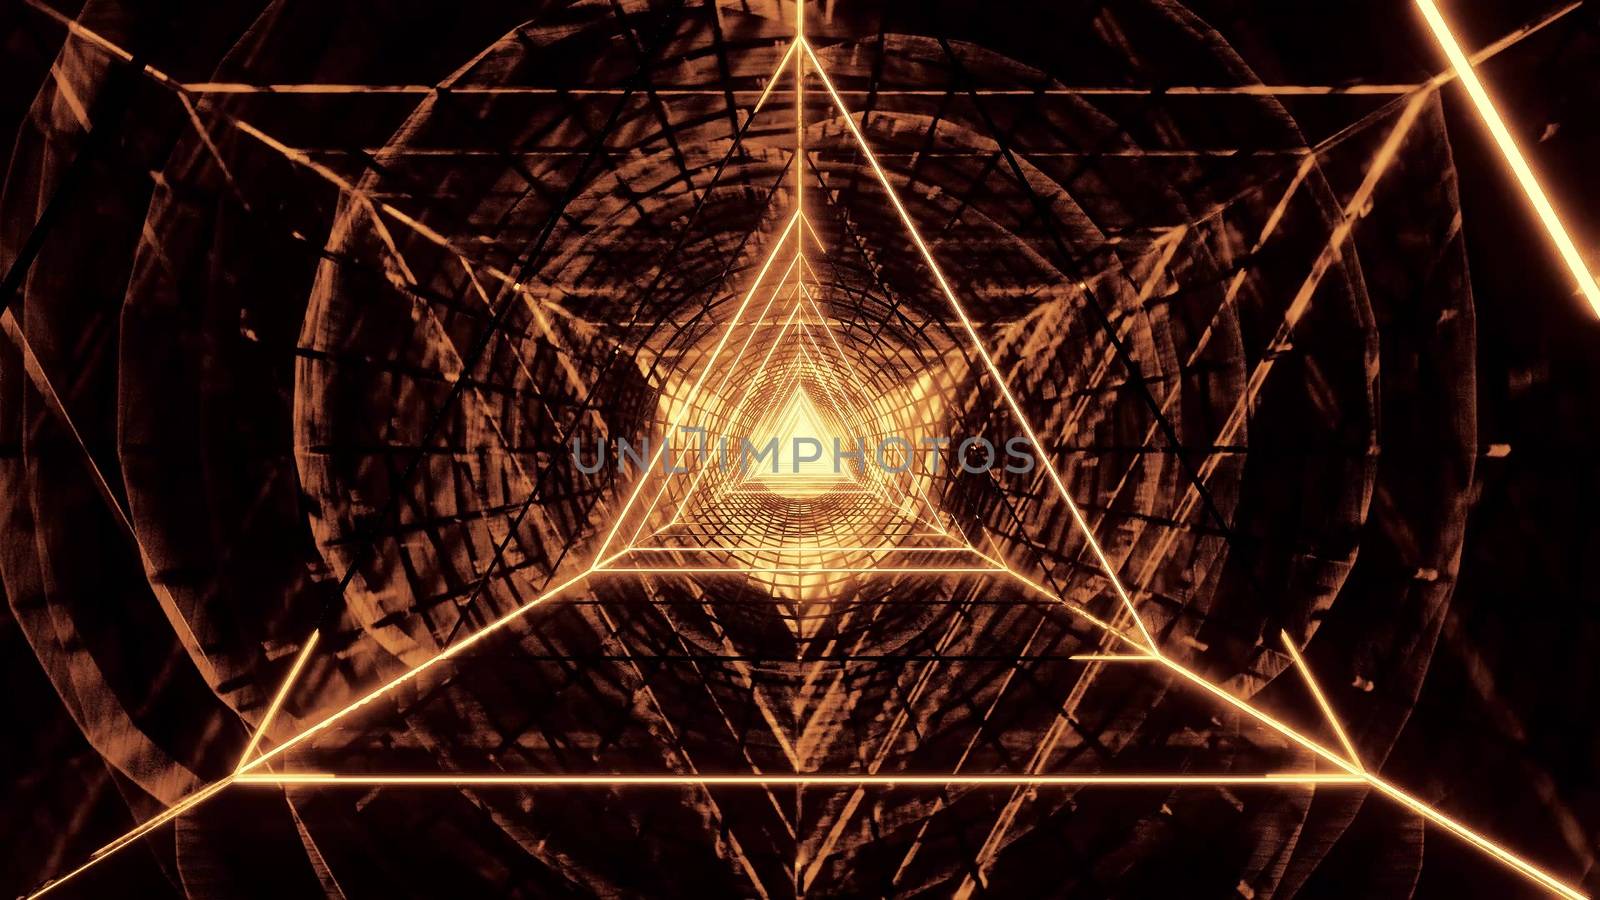 abstract glowig wireframe triangle design with dark abstract background 3d illustration wallpaper by tunnelmotions